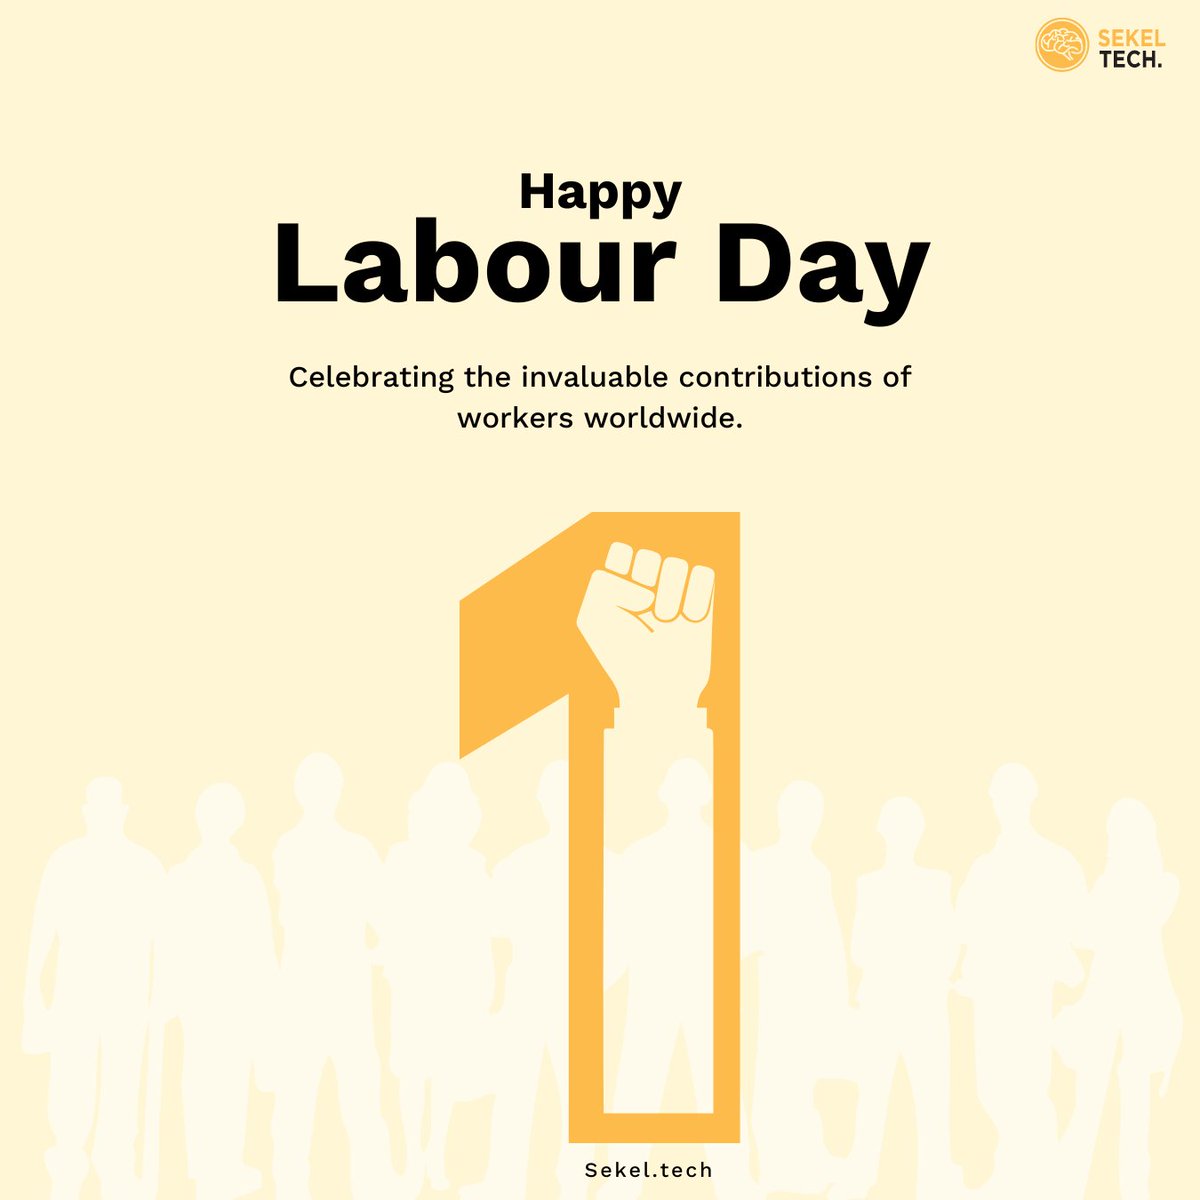 Happy Labour Day! Let's take a moment to recognize and appreciate the dedication of workers worldwide. Your hard work makes a difference every day. 

#labourday #labourday2024 #InternationalWorkersDay #MaharashtraDay